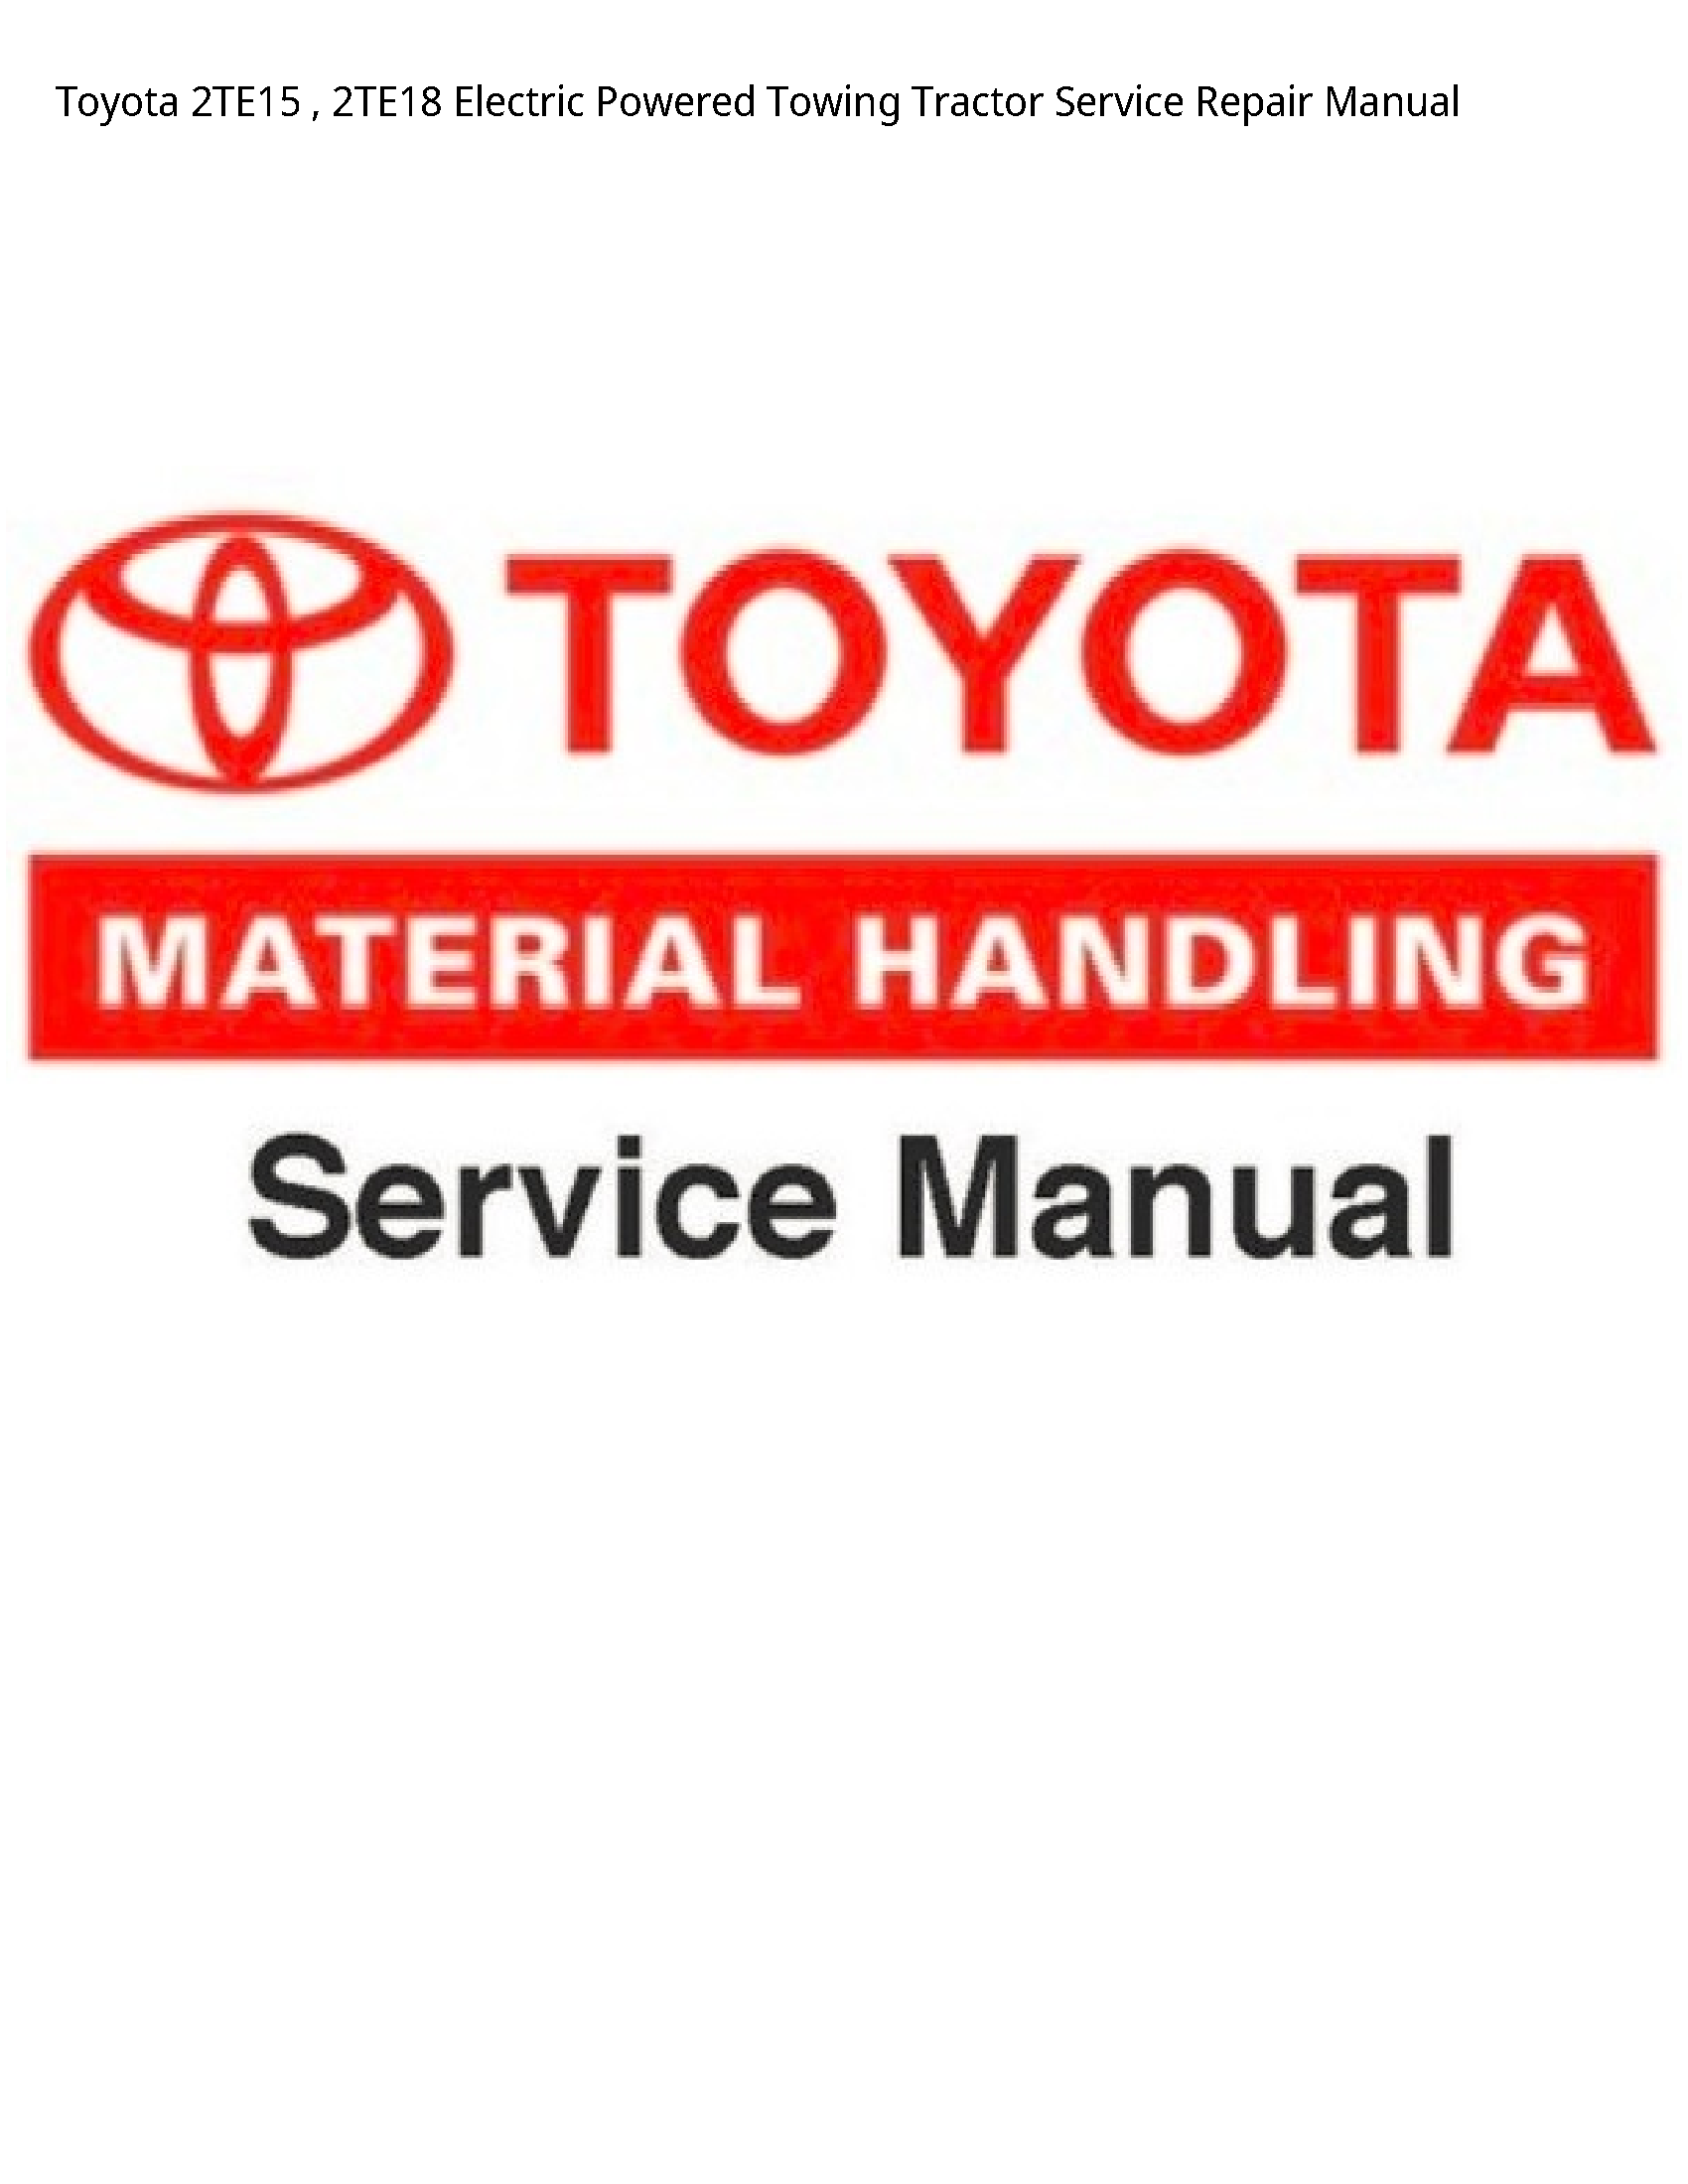 Toyota 2TE15 Electric Powered Towing Tractor manual